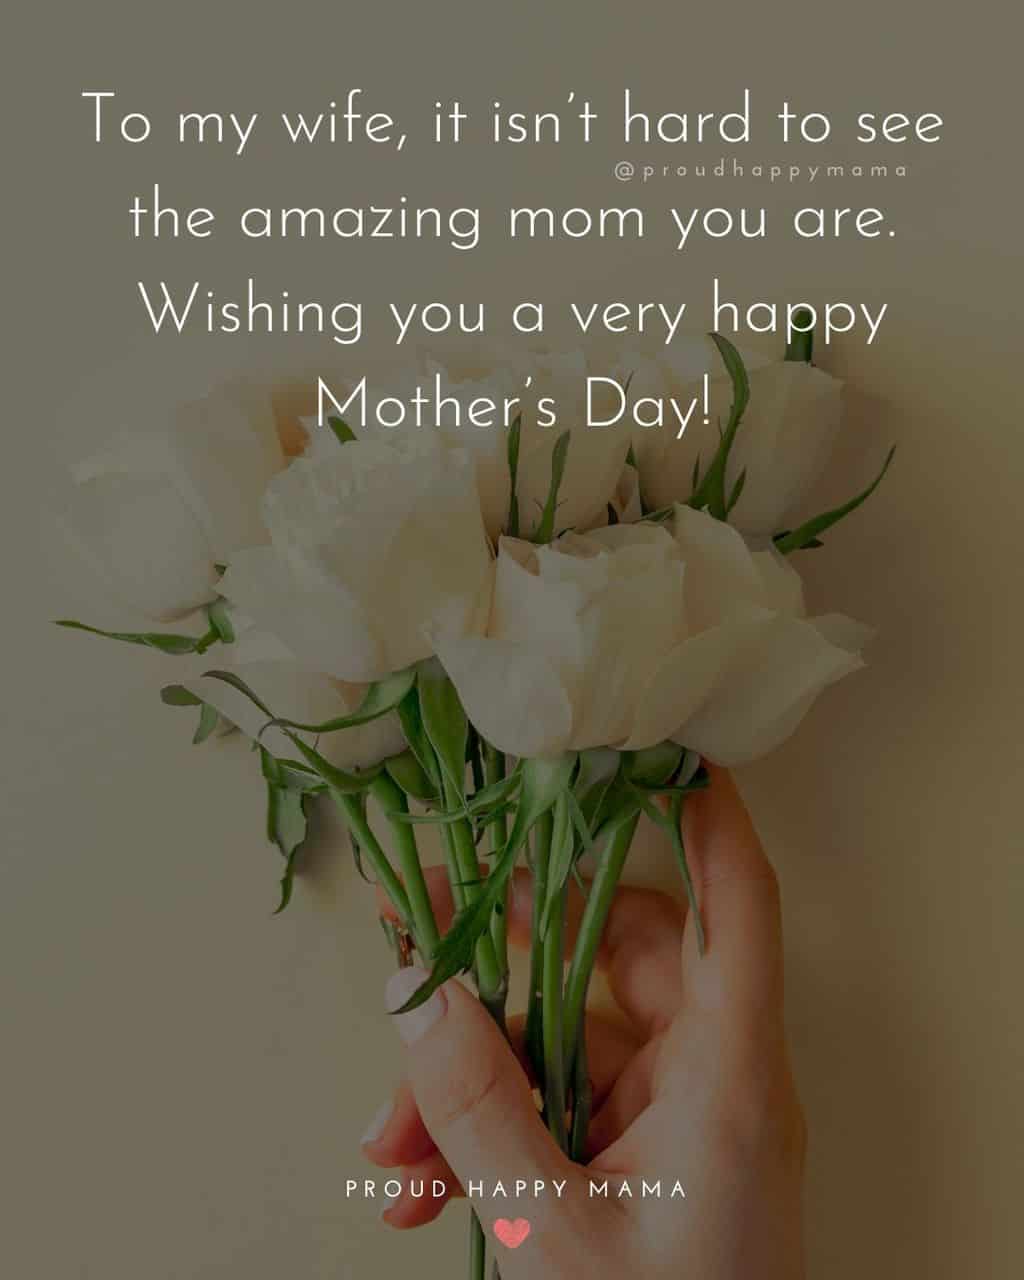 Happy Mothers Day Quotes For Wife - To my wife, it isn’t hard to see the amazing mom you are. Wishing you a very happy